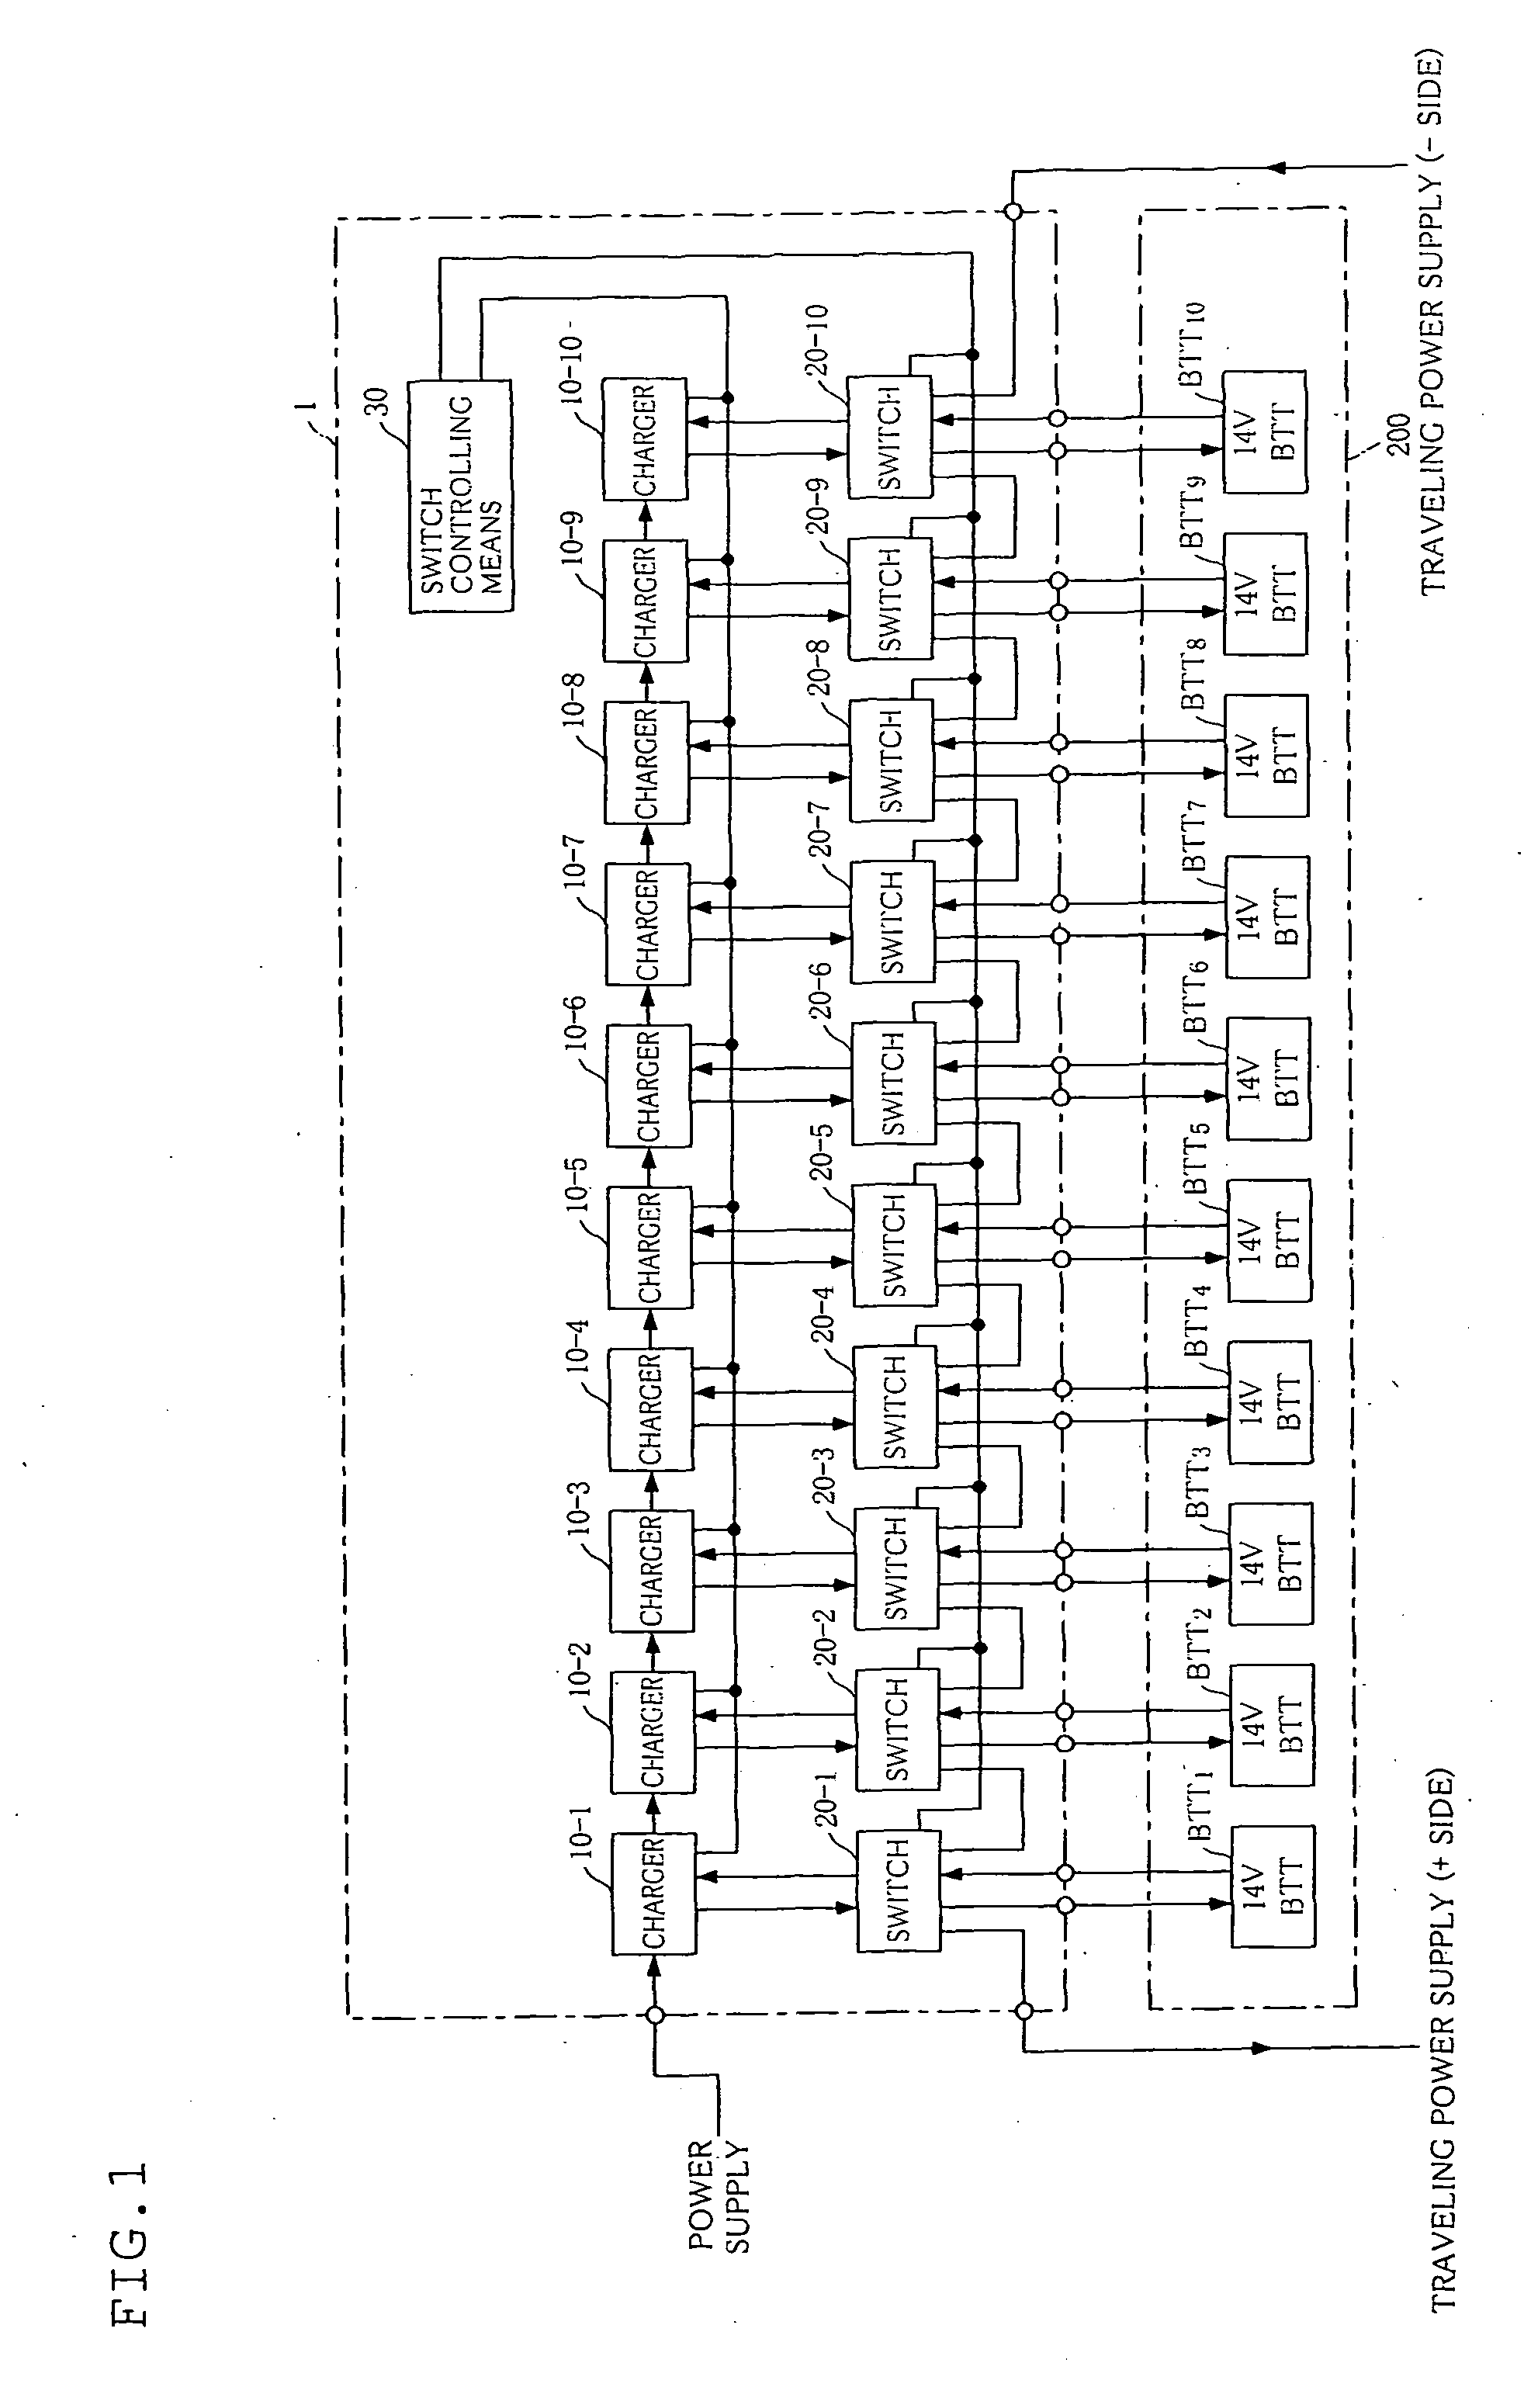 Charger and charging apparatus